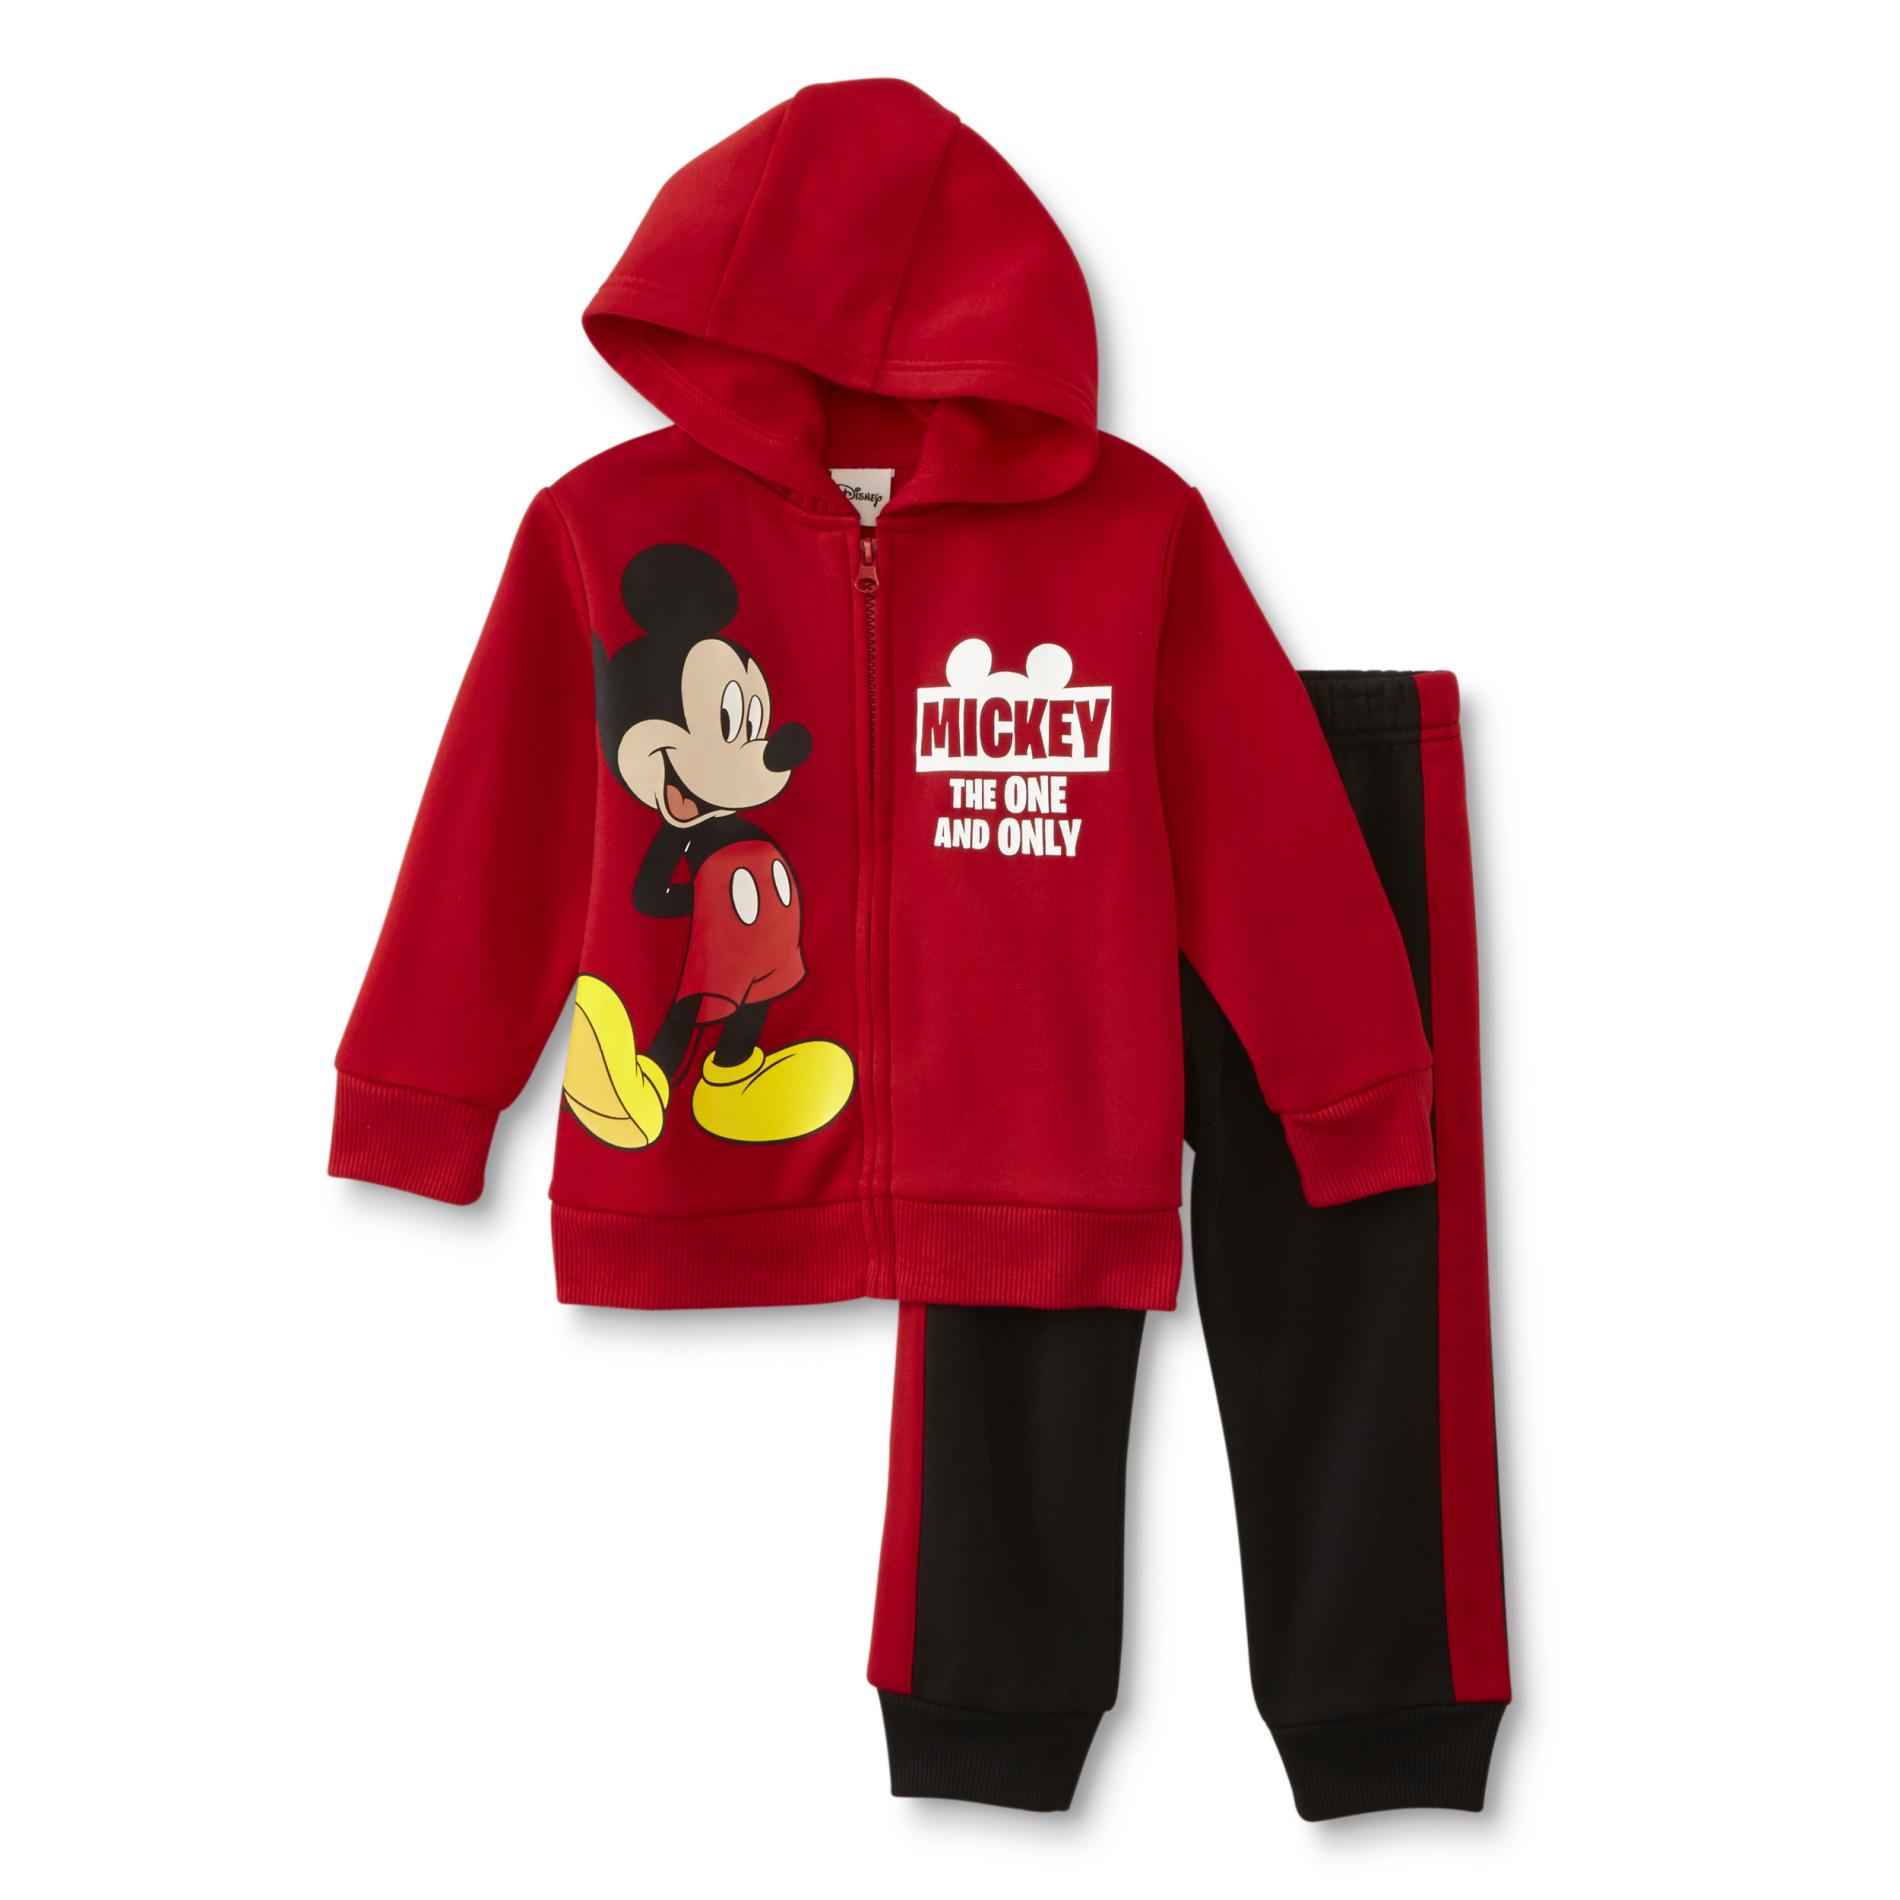 Disney Mickey Mouse Infant & Toddler Boys' Hoodie Jacket & Pants